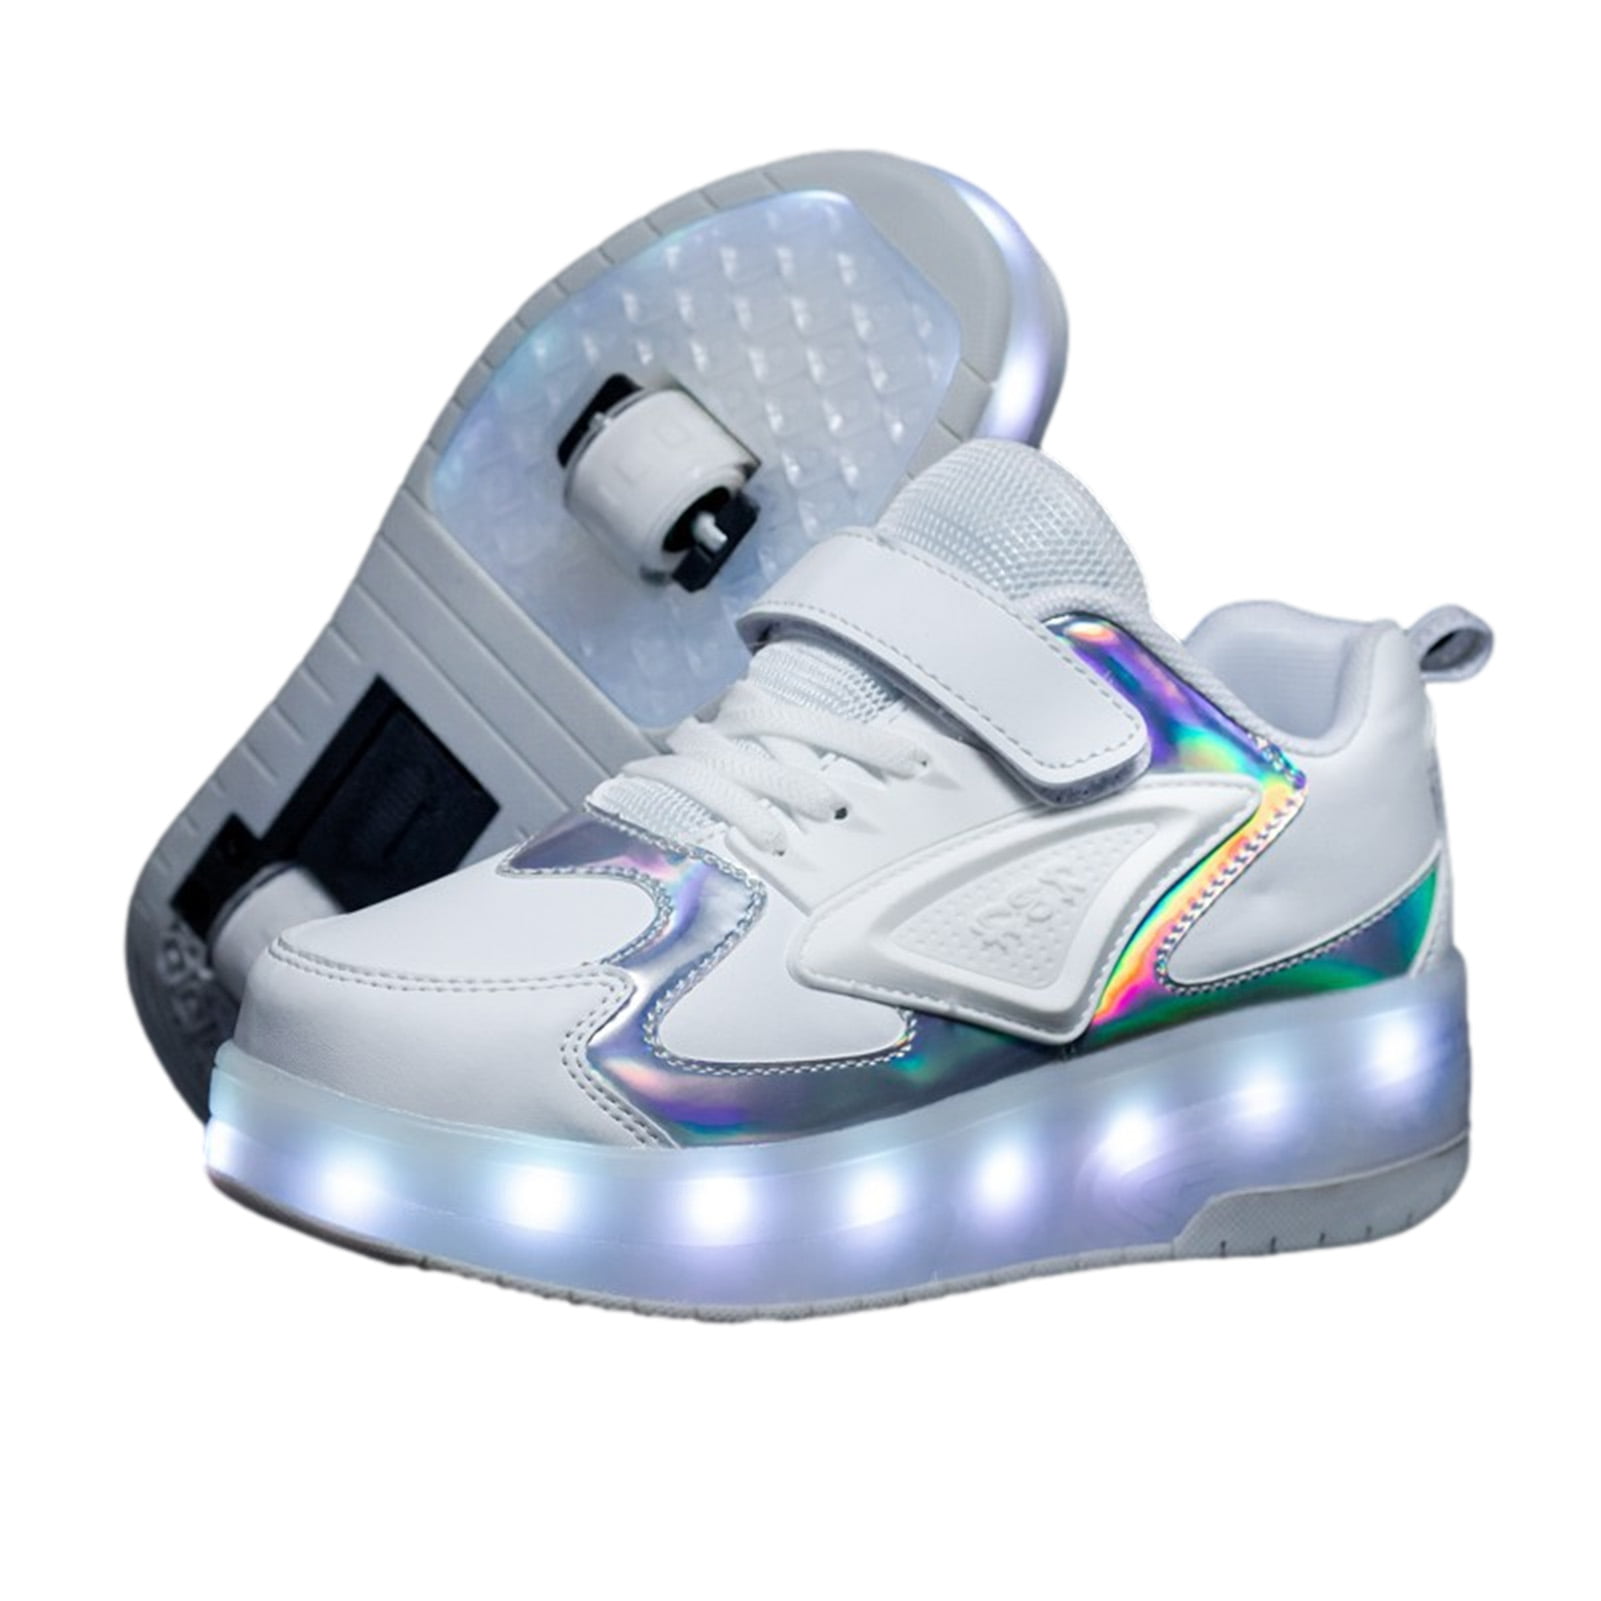 dhh Unisex Kids LED Roller Skates Shoes With Wheels Boys Girls LED Lights Luminous Trainers Double Single Wheel Technical Skateboarding Shoes Outdoor Gymnastics Sneakers With USB Charging,Black1-28 